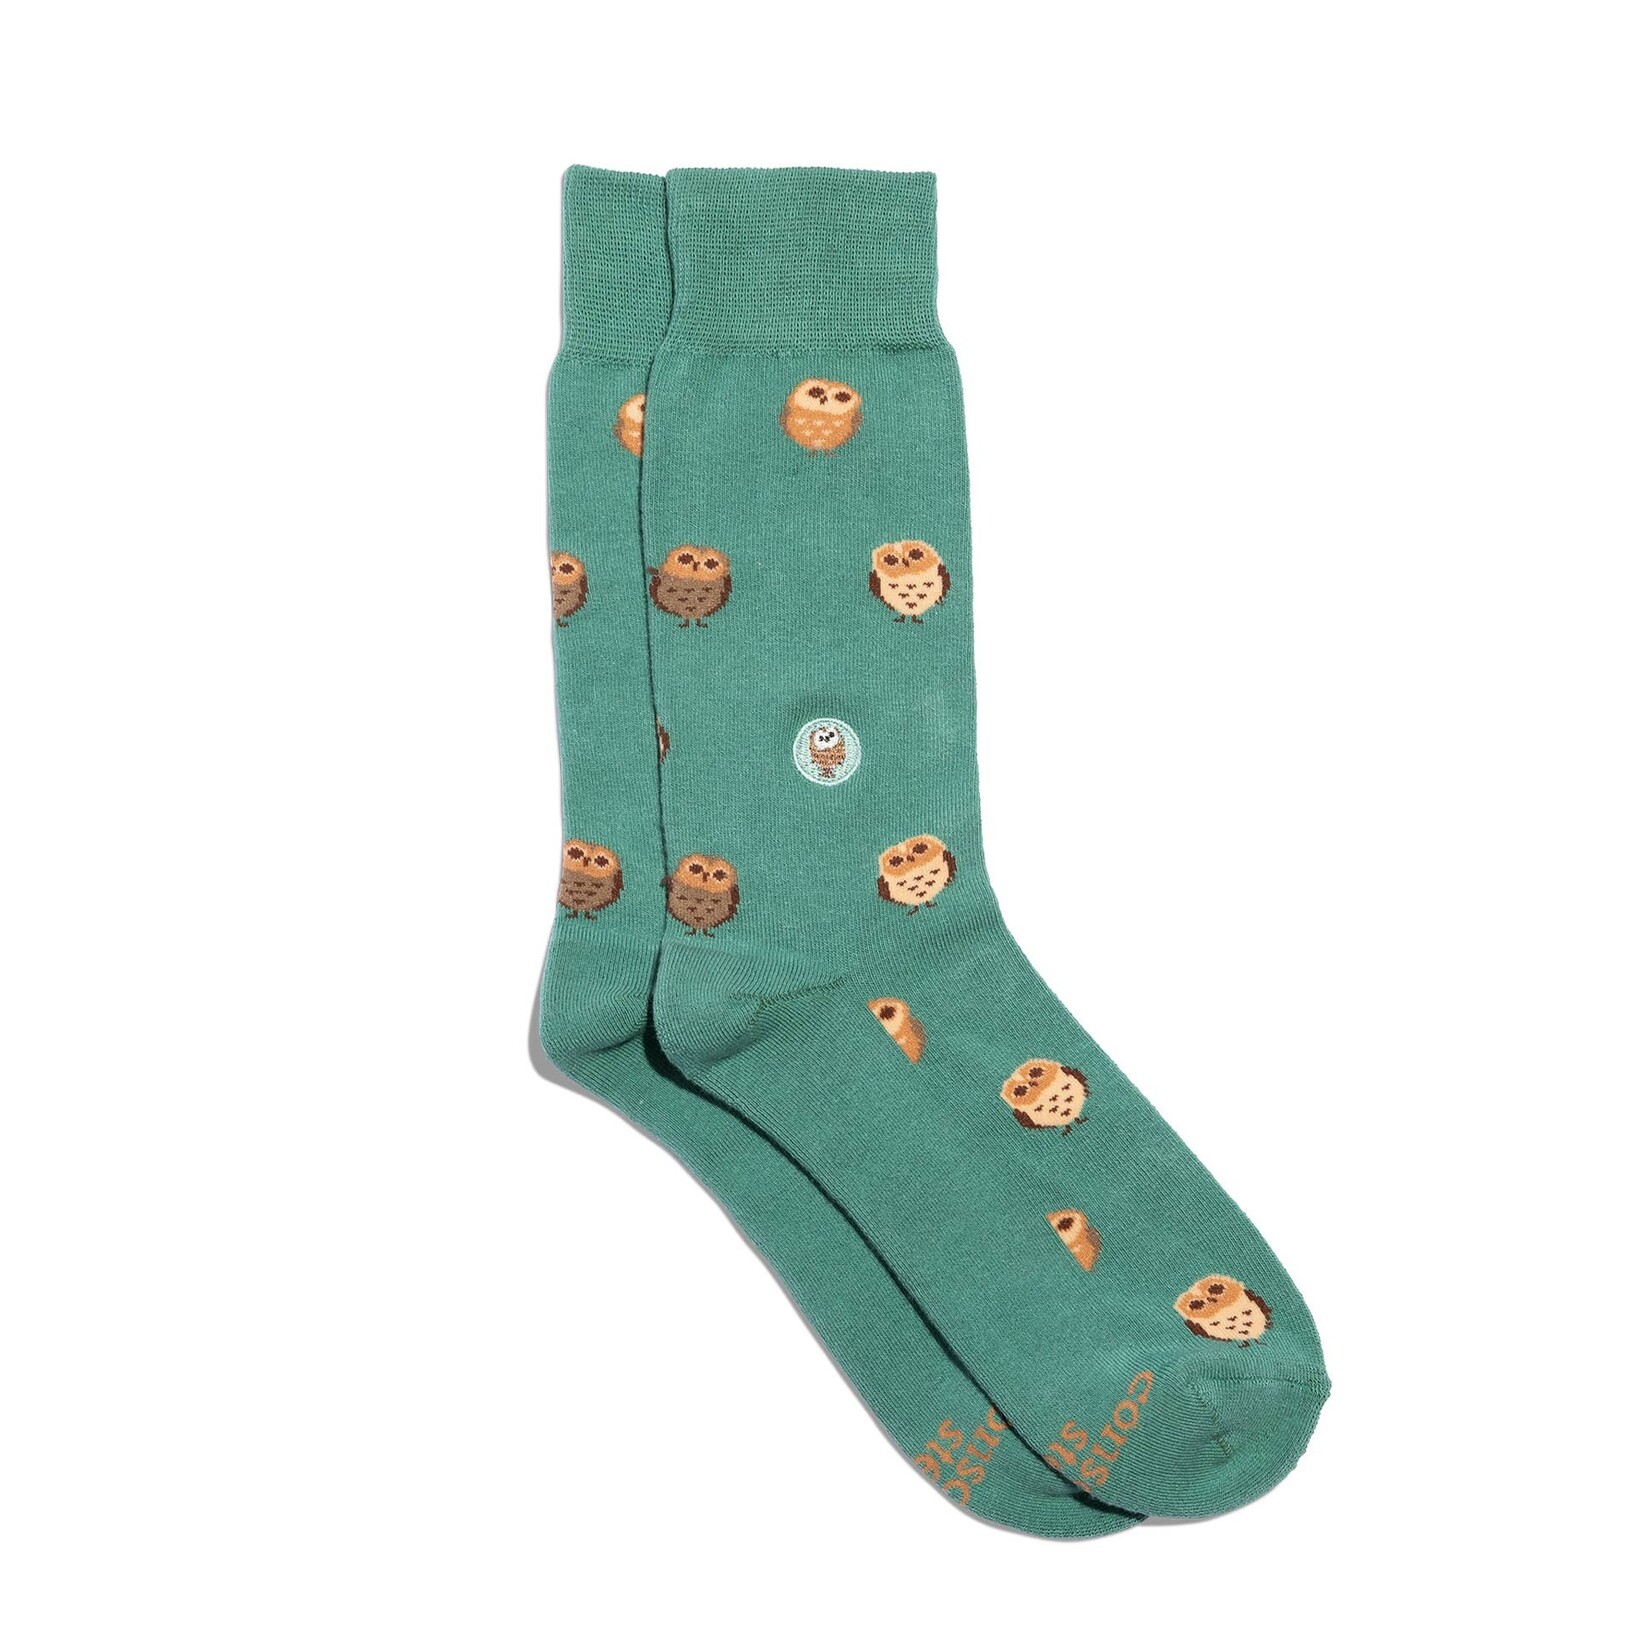 Conscious Step Socks that Protect Owls SM